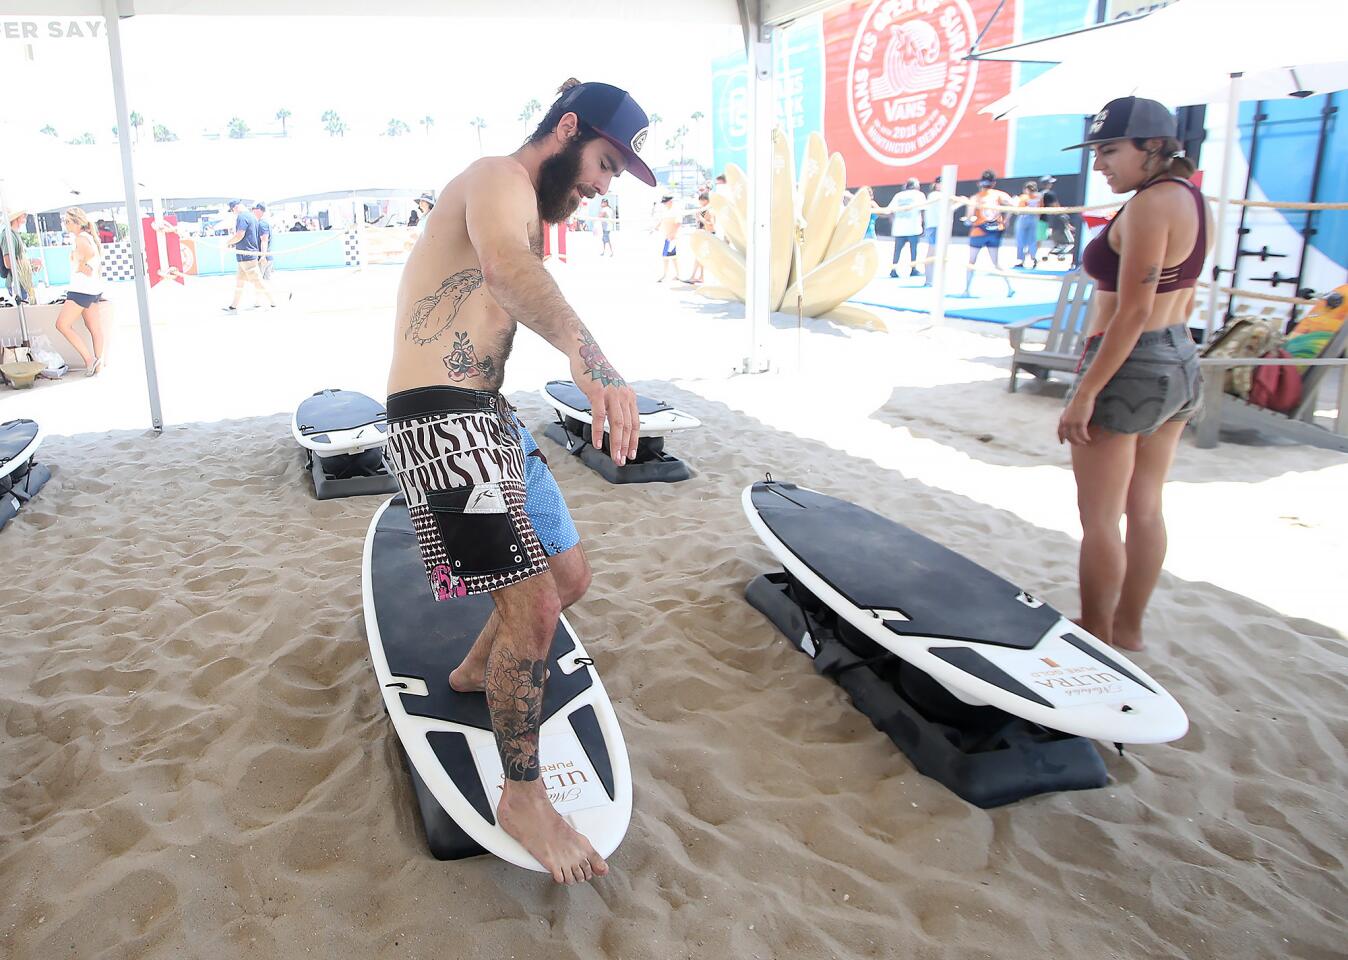 Fabio Taeliferri pretends to hang 10 as he participates in the "Surfer Says" workout program on moveable boards with friend Lila Rodriquez on Tuesday at the Vans U.S. Open of Surfing in Huntington Beach.